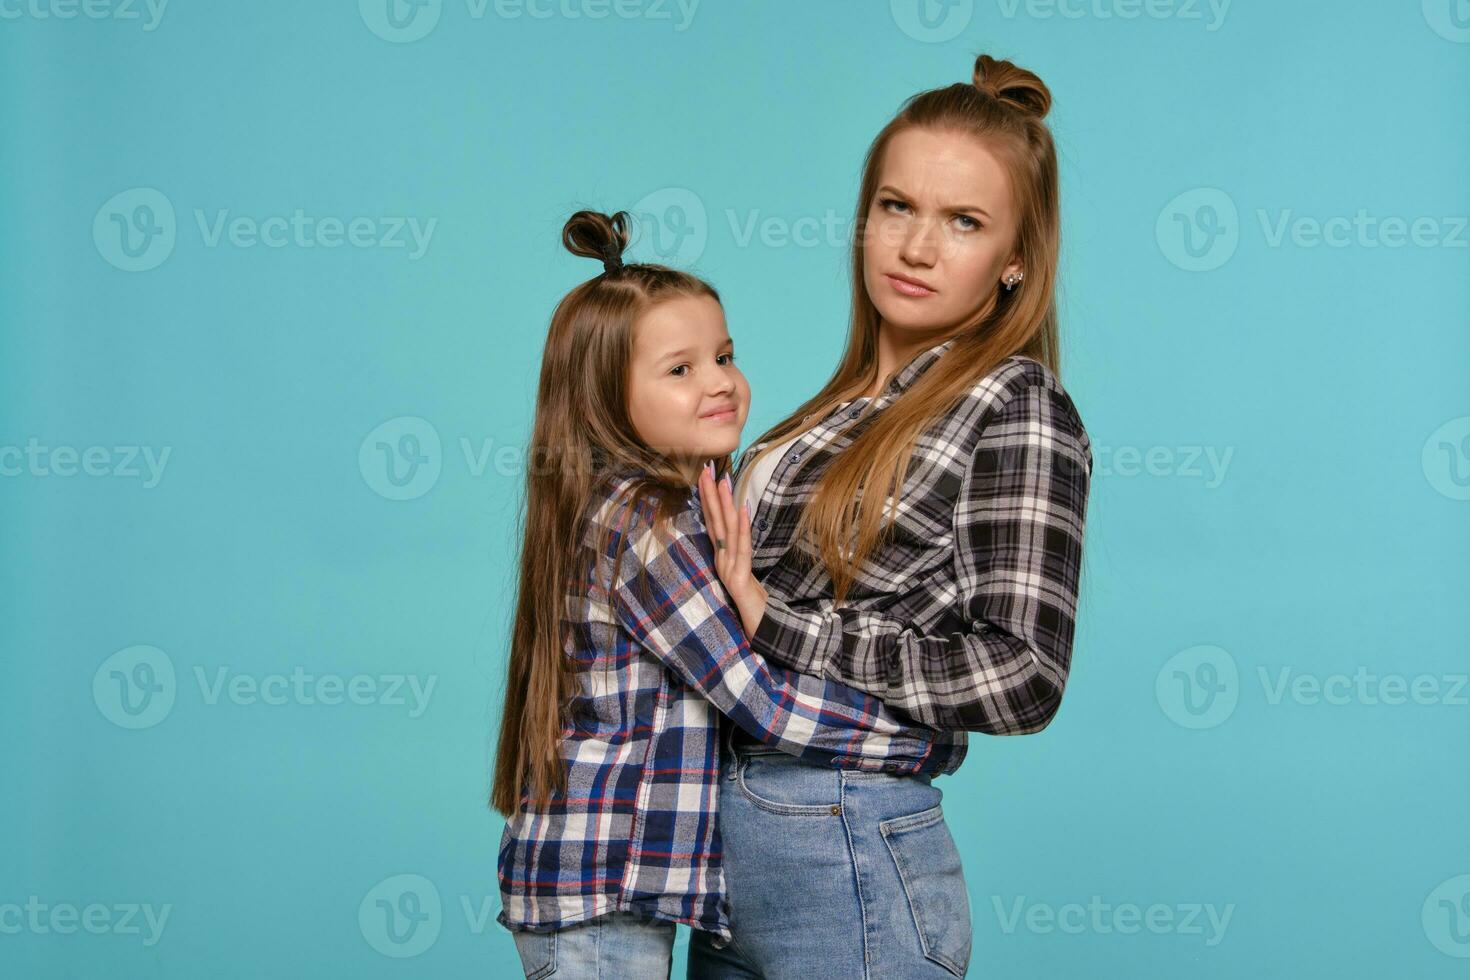 Mom and daughter with a funny hairstyles, dressed checkered shirts and blue denim jeans are posing against a blue studio background. Close-up shot. photo